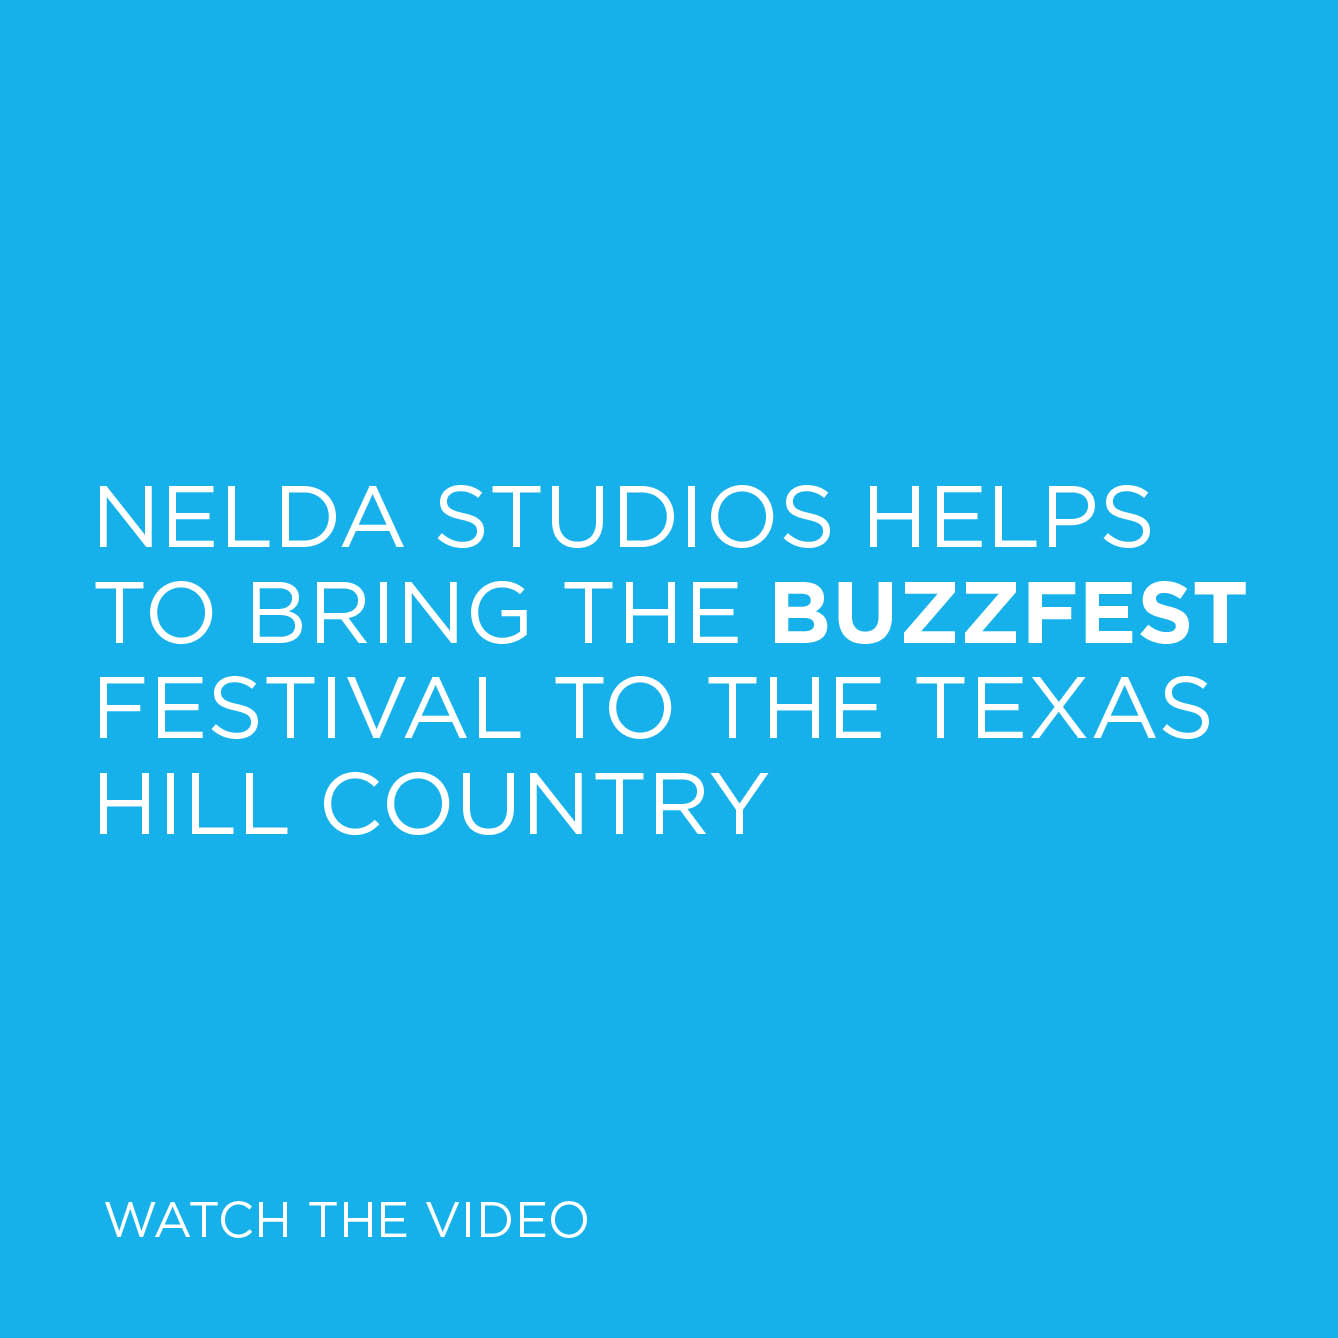 Nelda Studios helps to bring the Buzzfest festival to the Texas hill country – watch the video